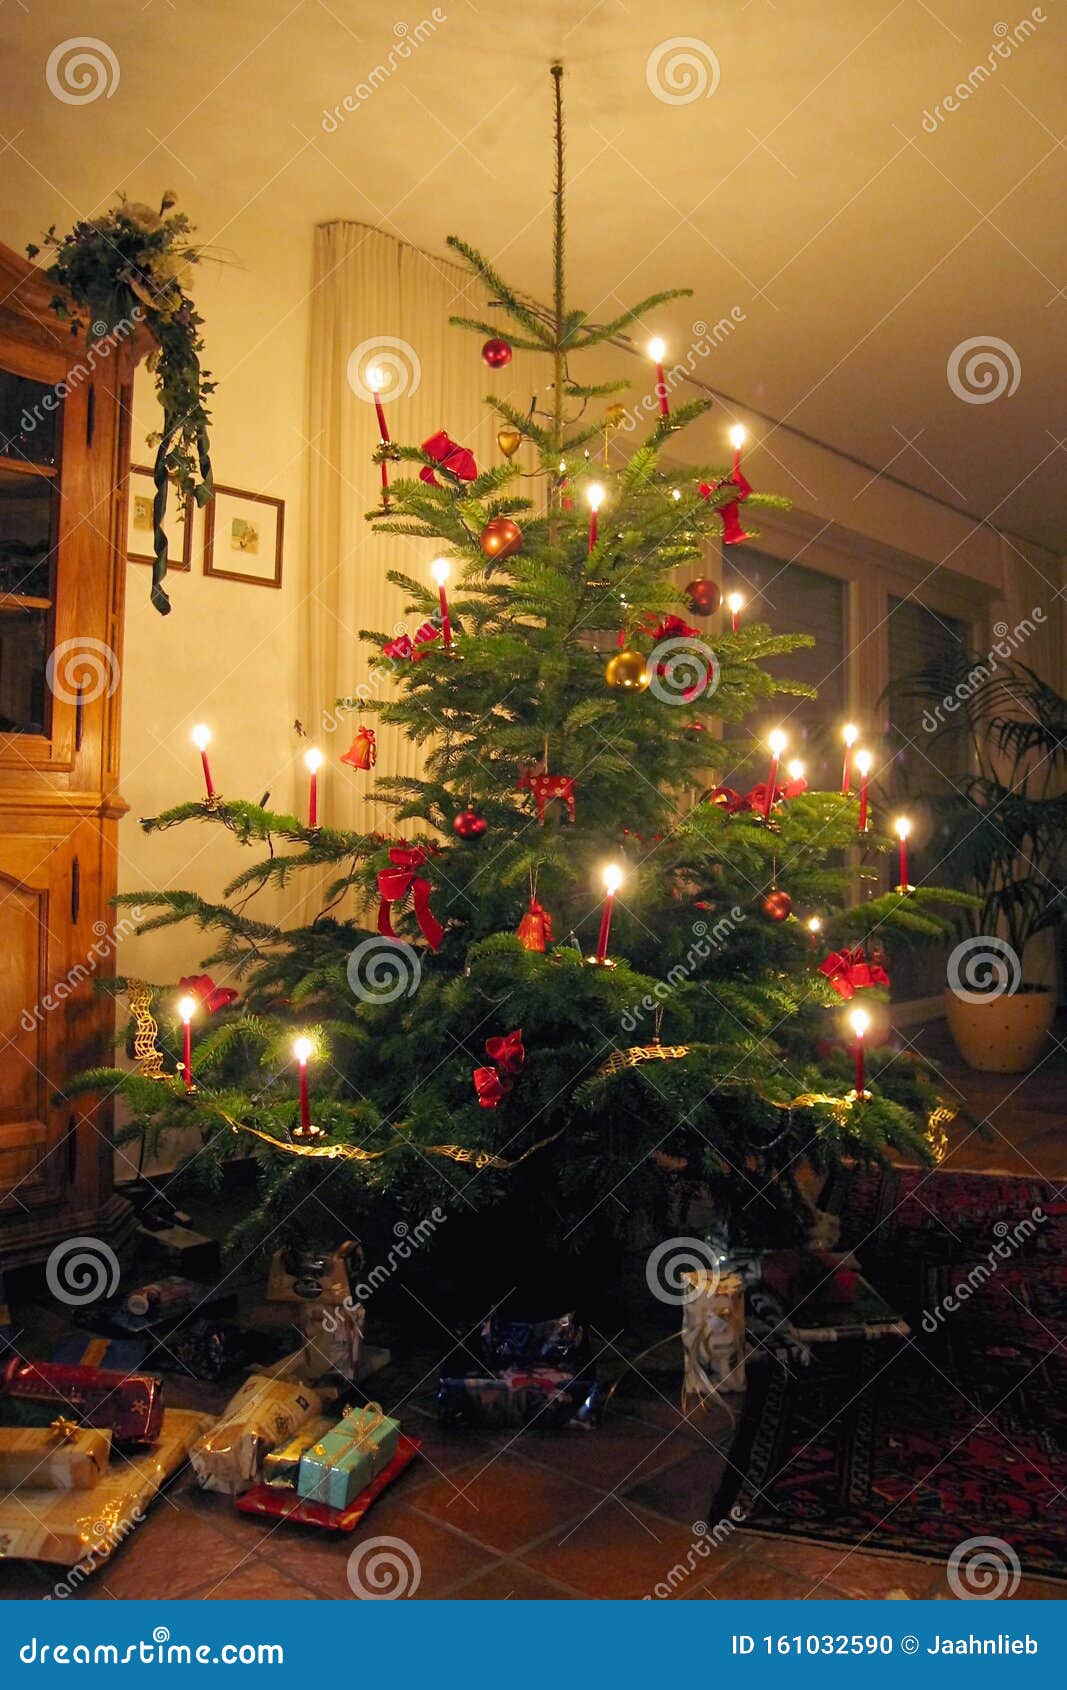 Traditional European Christmas Tree With Candles Burning And Presents ...